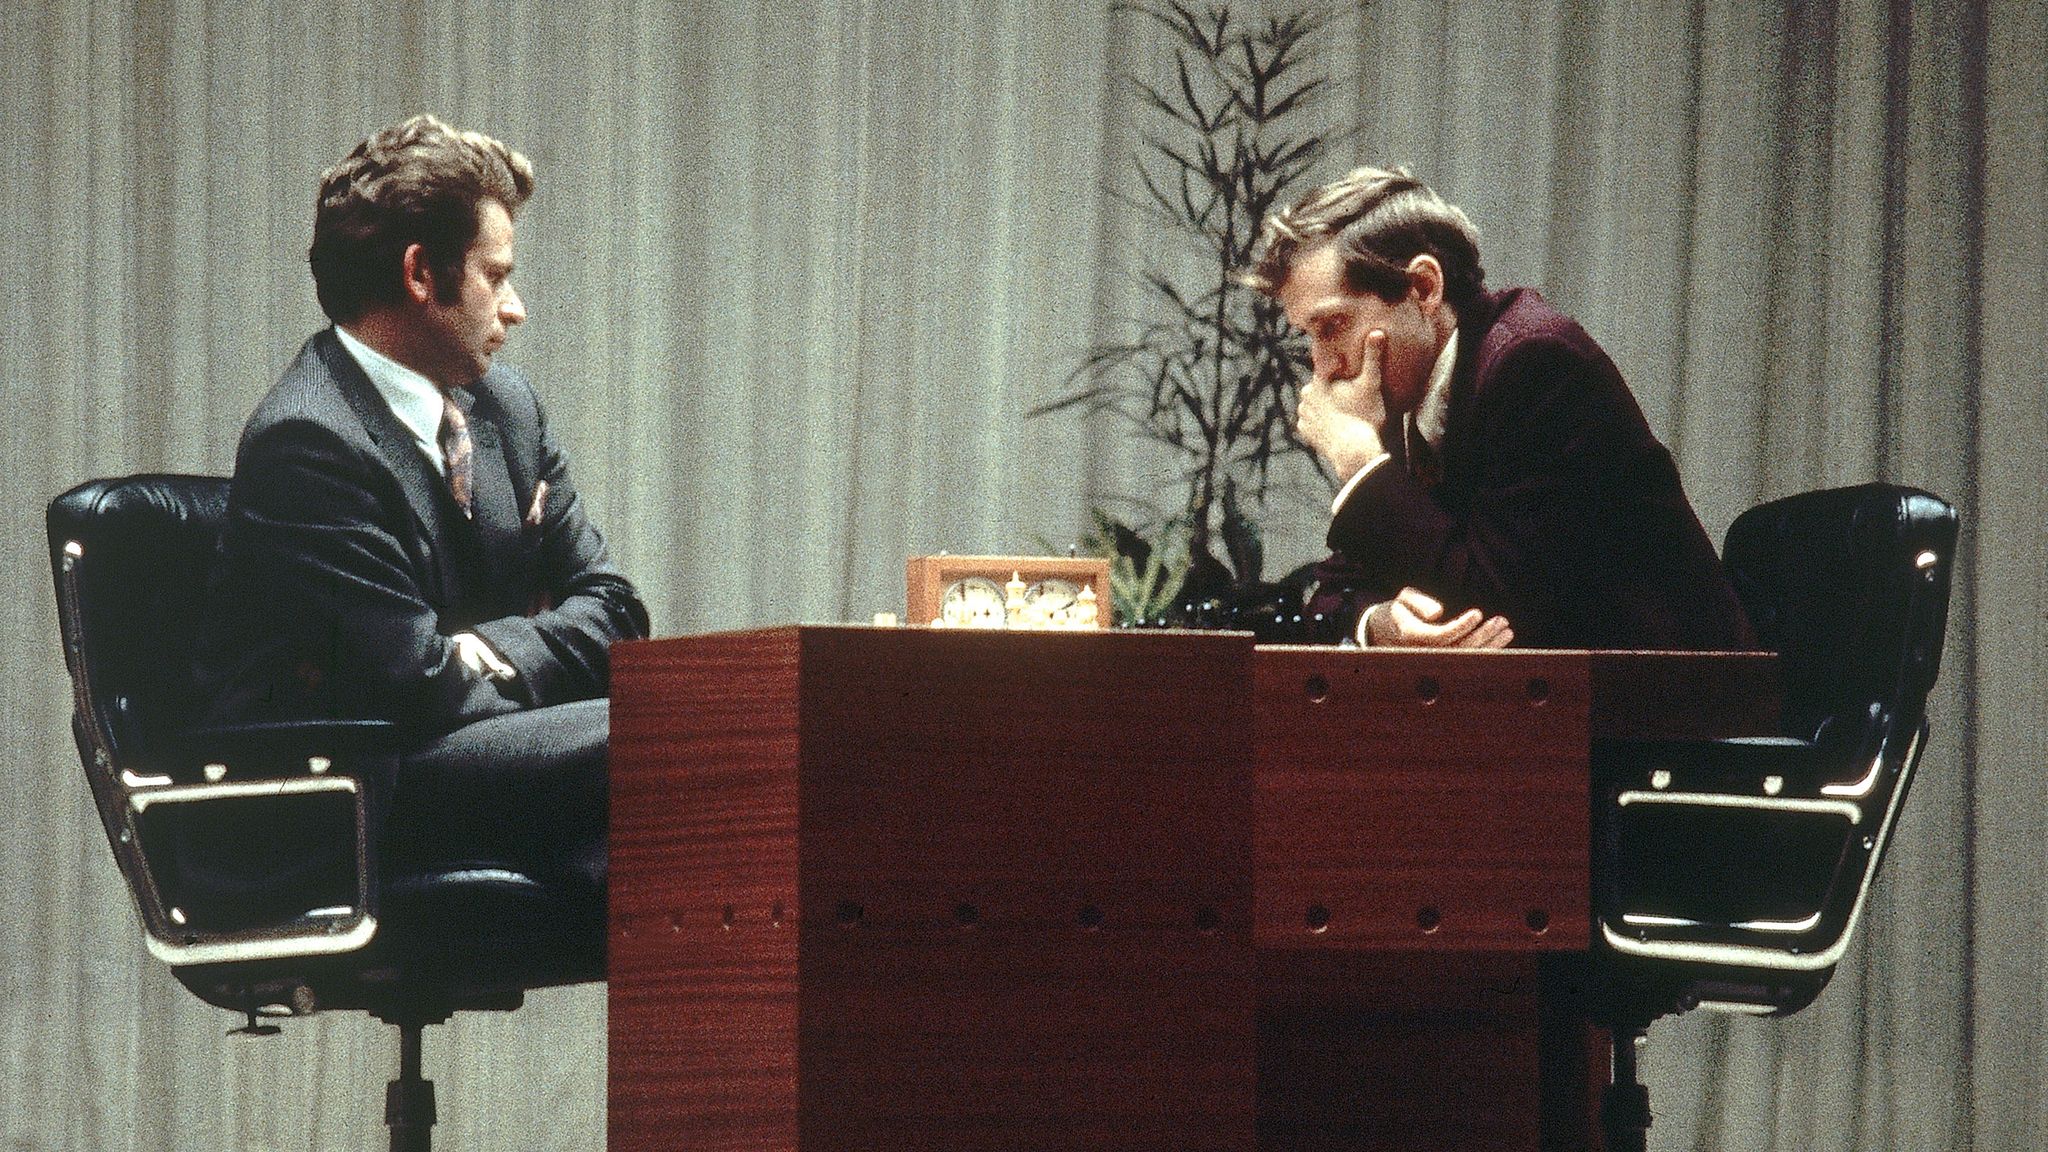 Opinion: Fischer never would have beaten Spassky if Twitter had existed -  MarketWatch